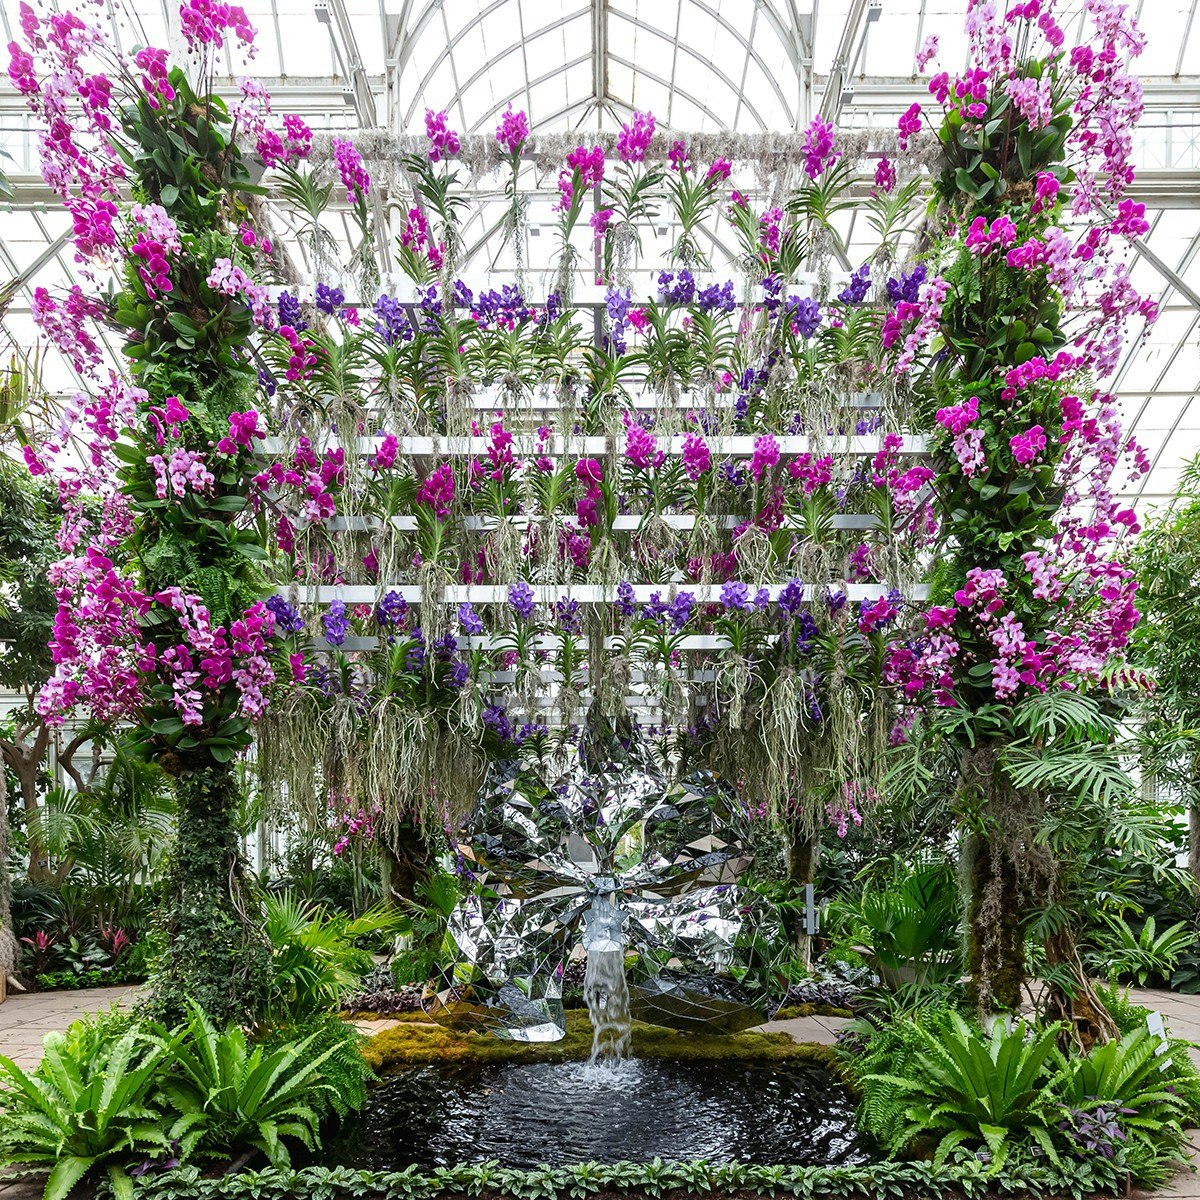 Purple vandas suspended above a 10-foot-tall mirrored orchid sculpture